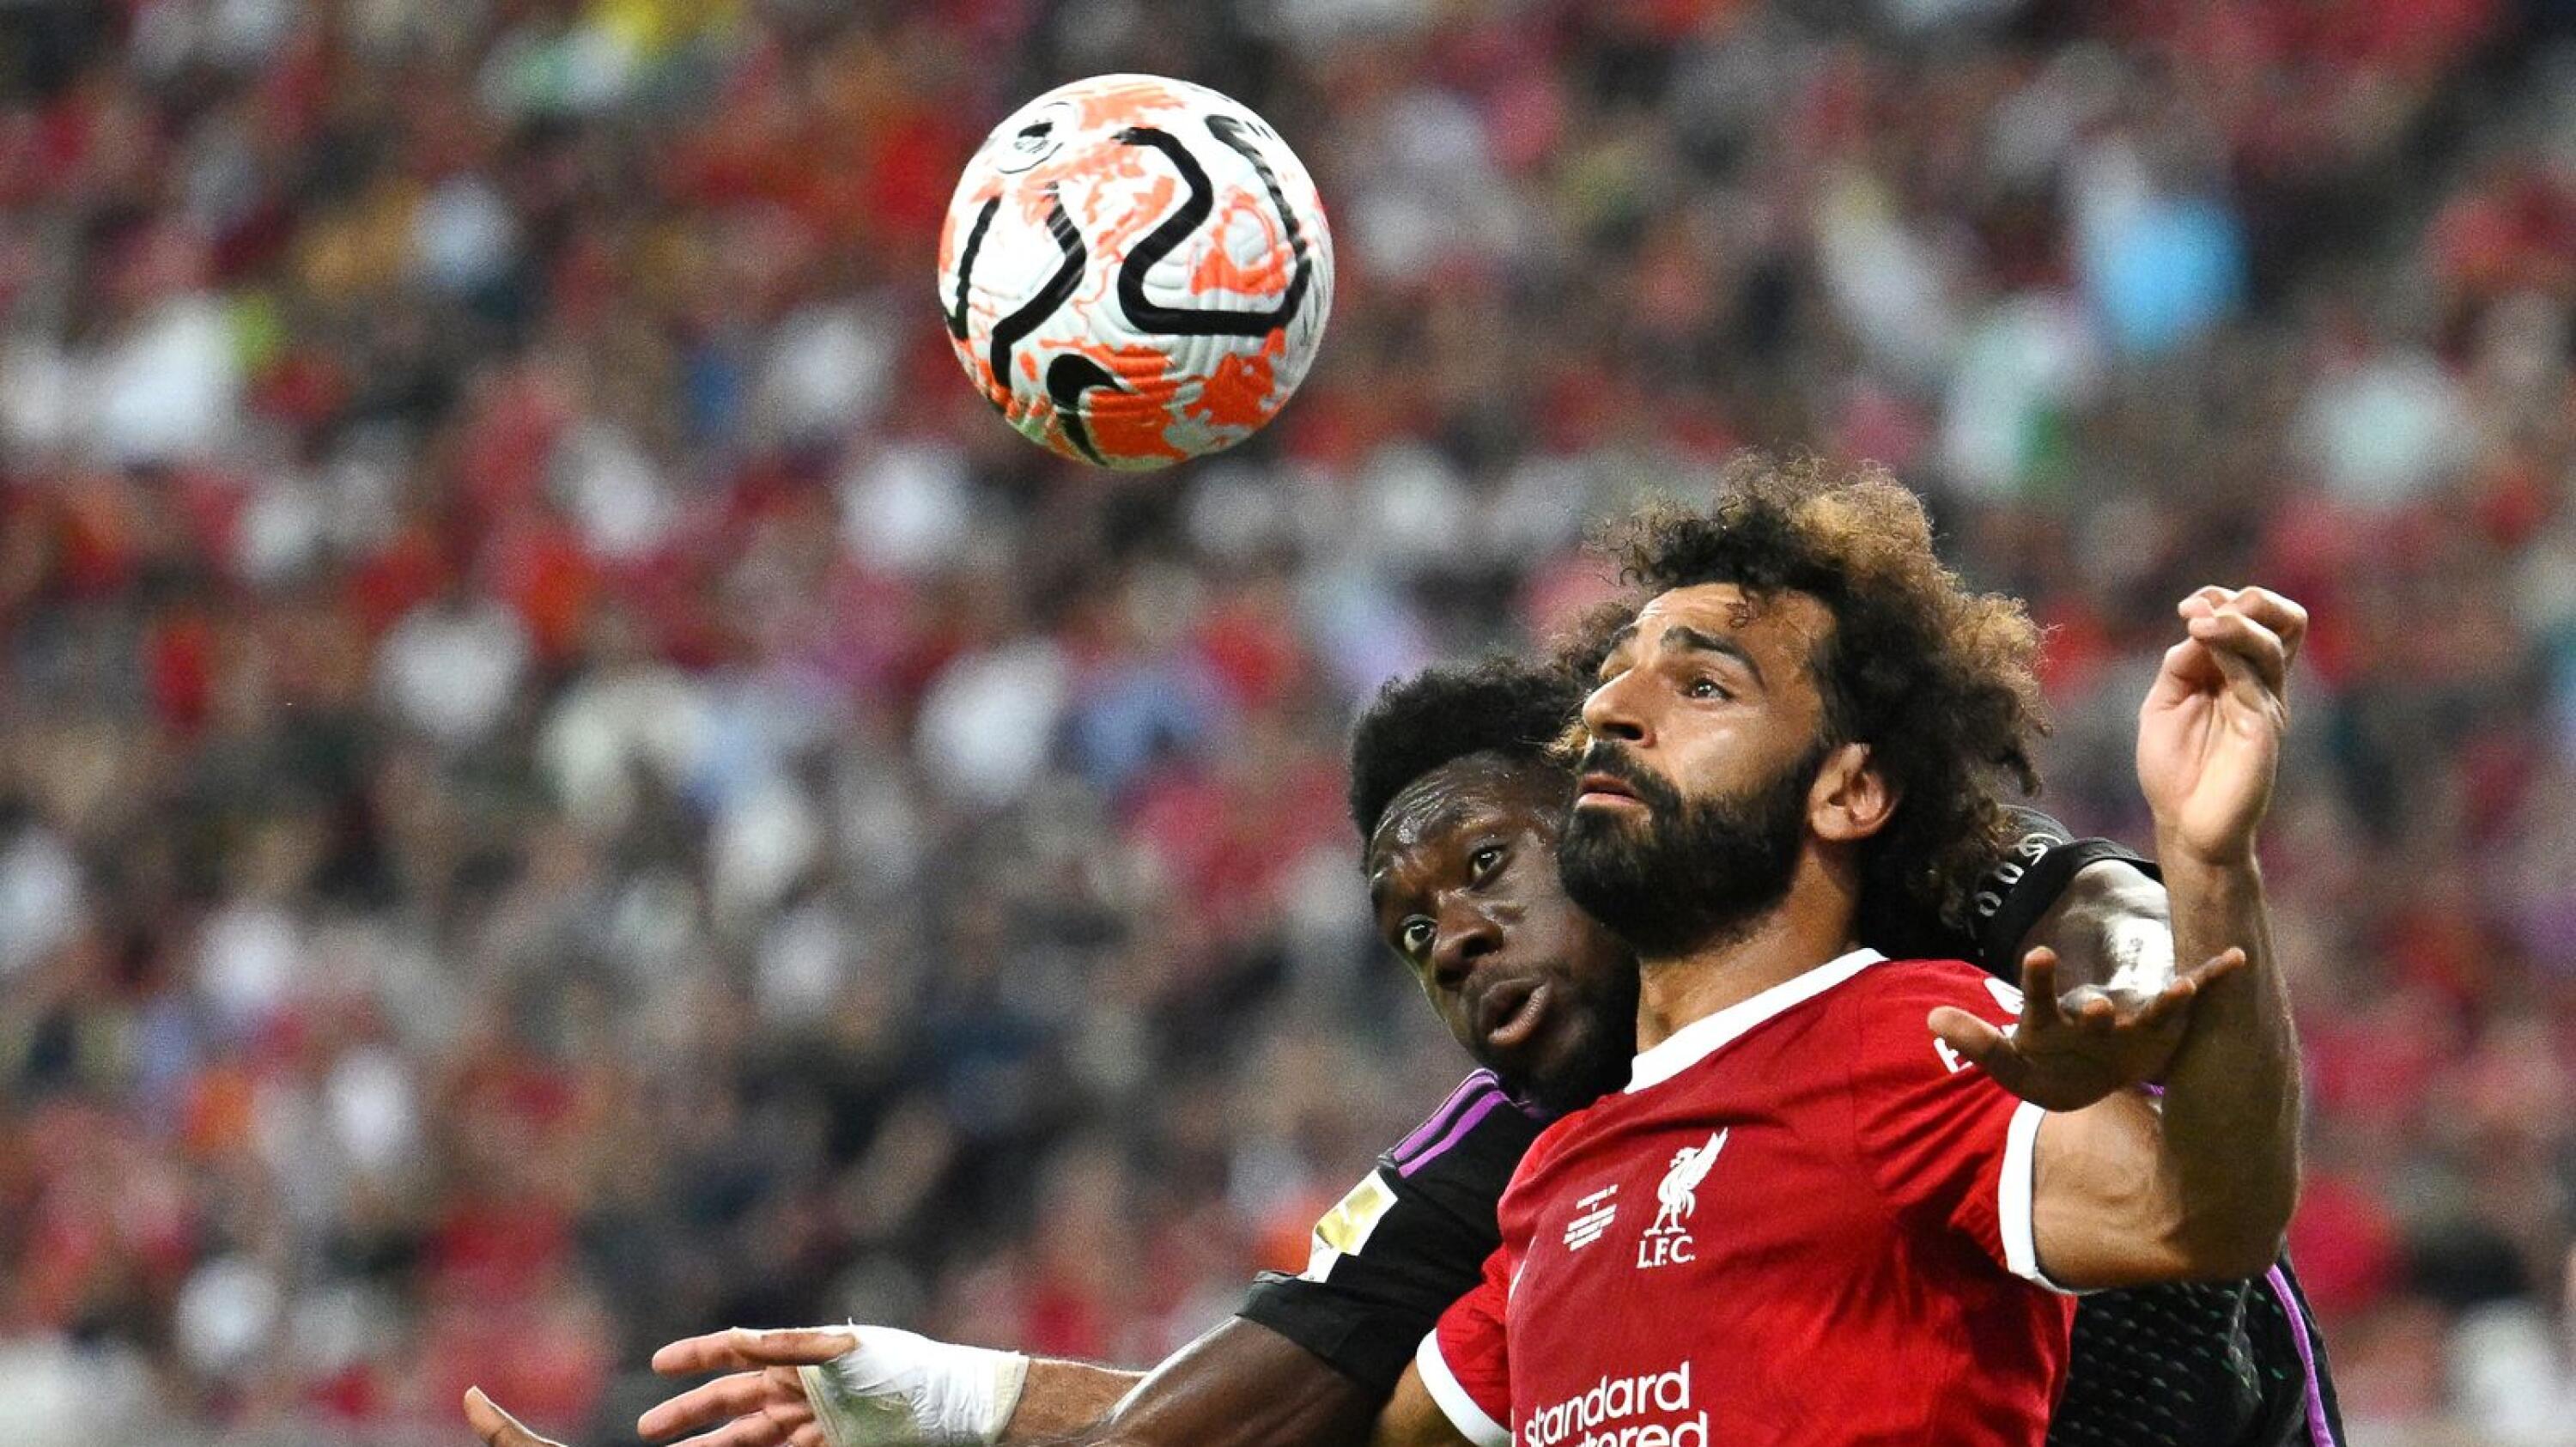 Liverpool's Egyptian striker Mohamed Salah (front) fights for the ball against Bayern Munich's Canadian midfielder Alphonso Davies during the Singapore Festival of Football pre-season friendly match in Singapore